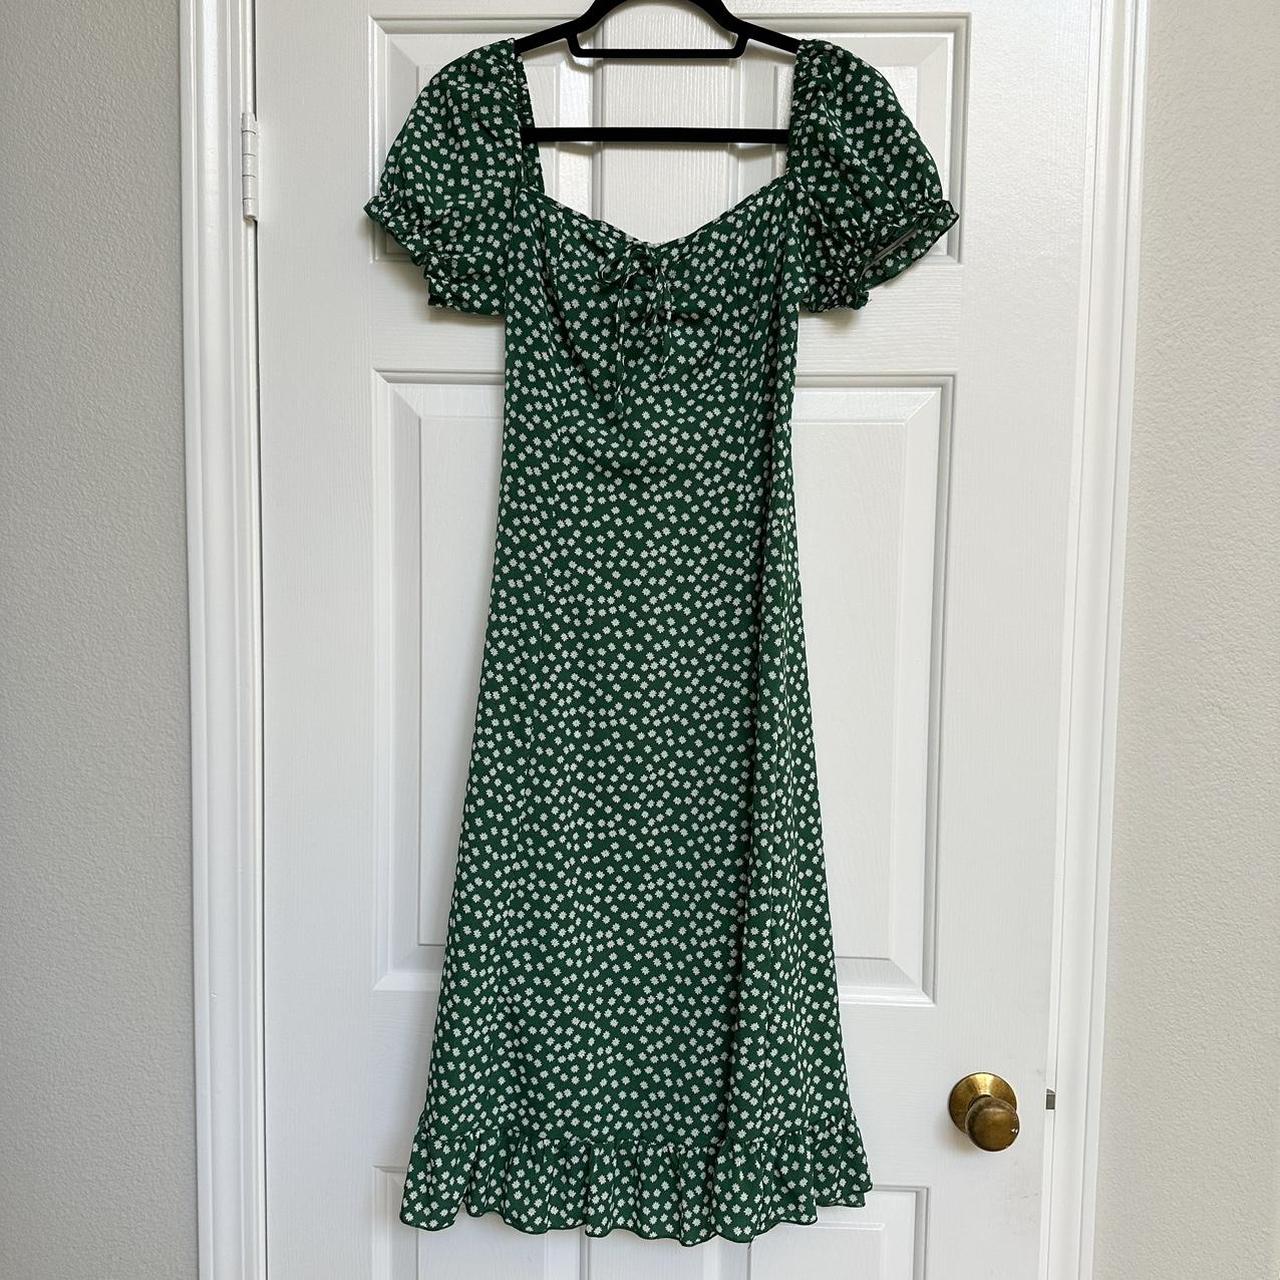 Shien green midi dress with white daisies! Love the... - Depop